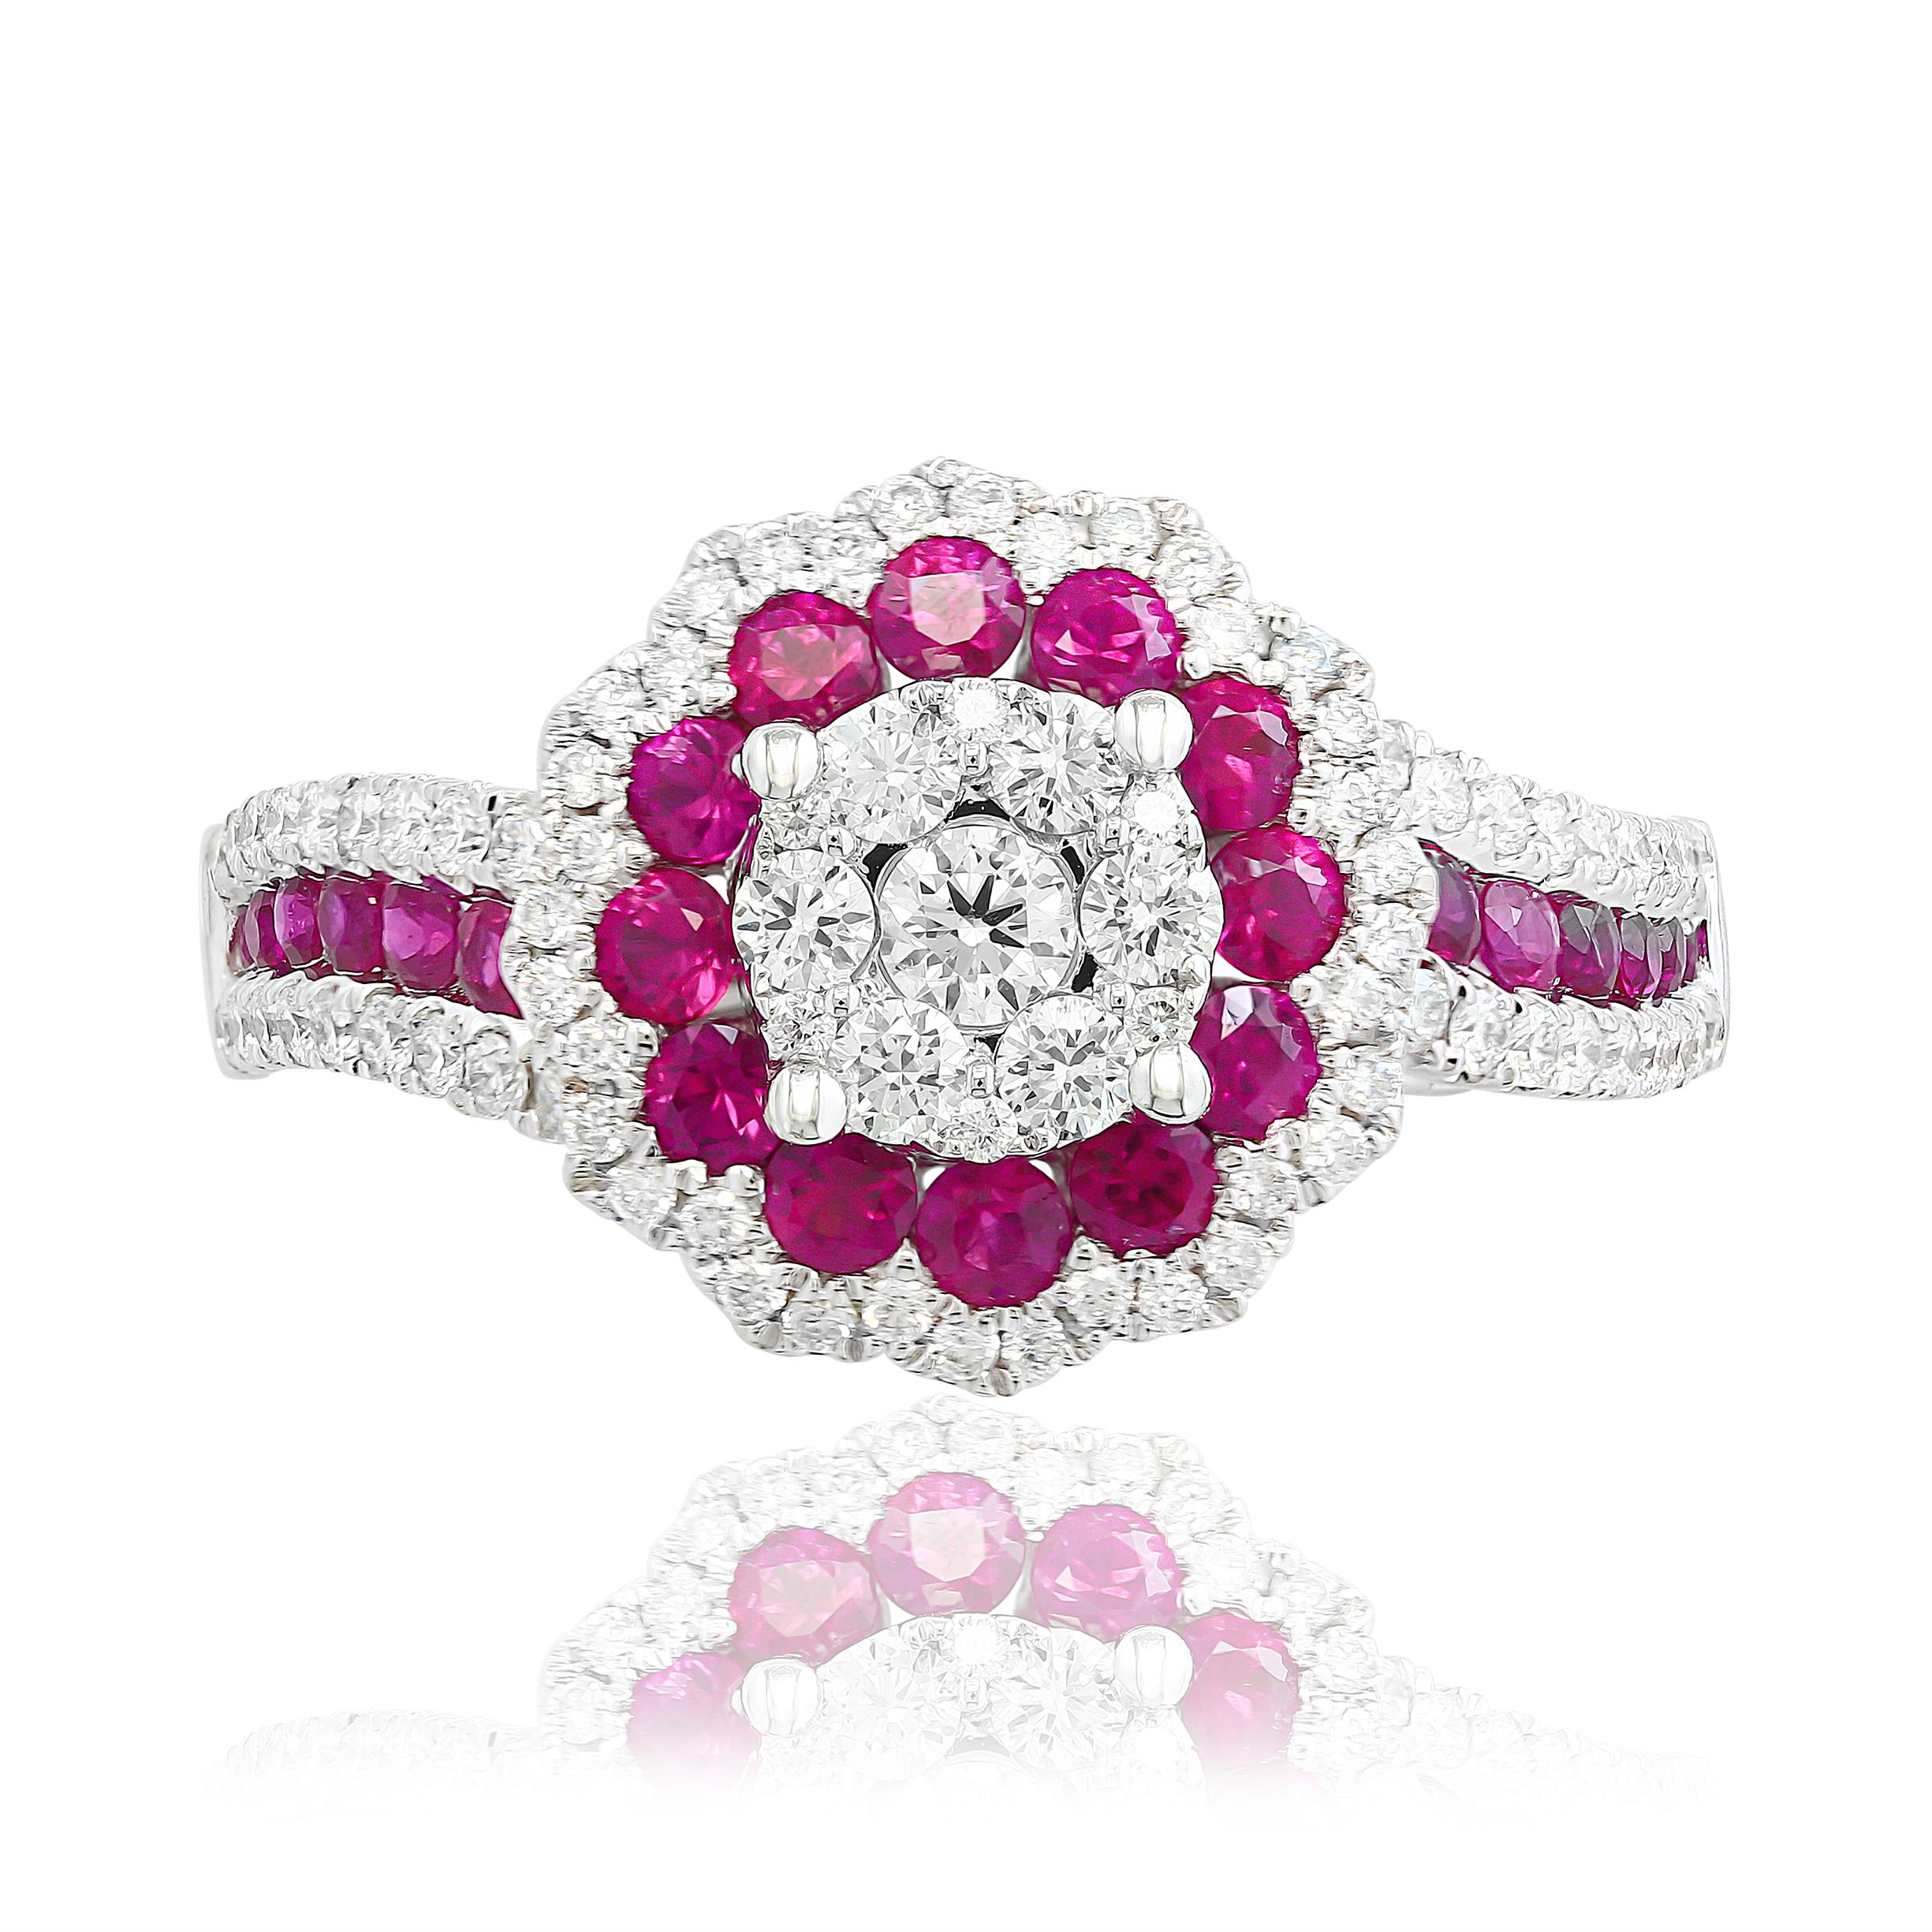 A unique and stylish flower shape ring showcasing a cluster of round diamonds in the center surrounded by a row of rubies and another row of diamonds. 24 Rubies weigh 0.73 carat and 85 diamonds weigh 0.60 carat in total.  Made in 14k white gold.